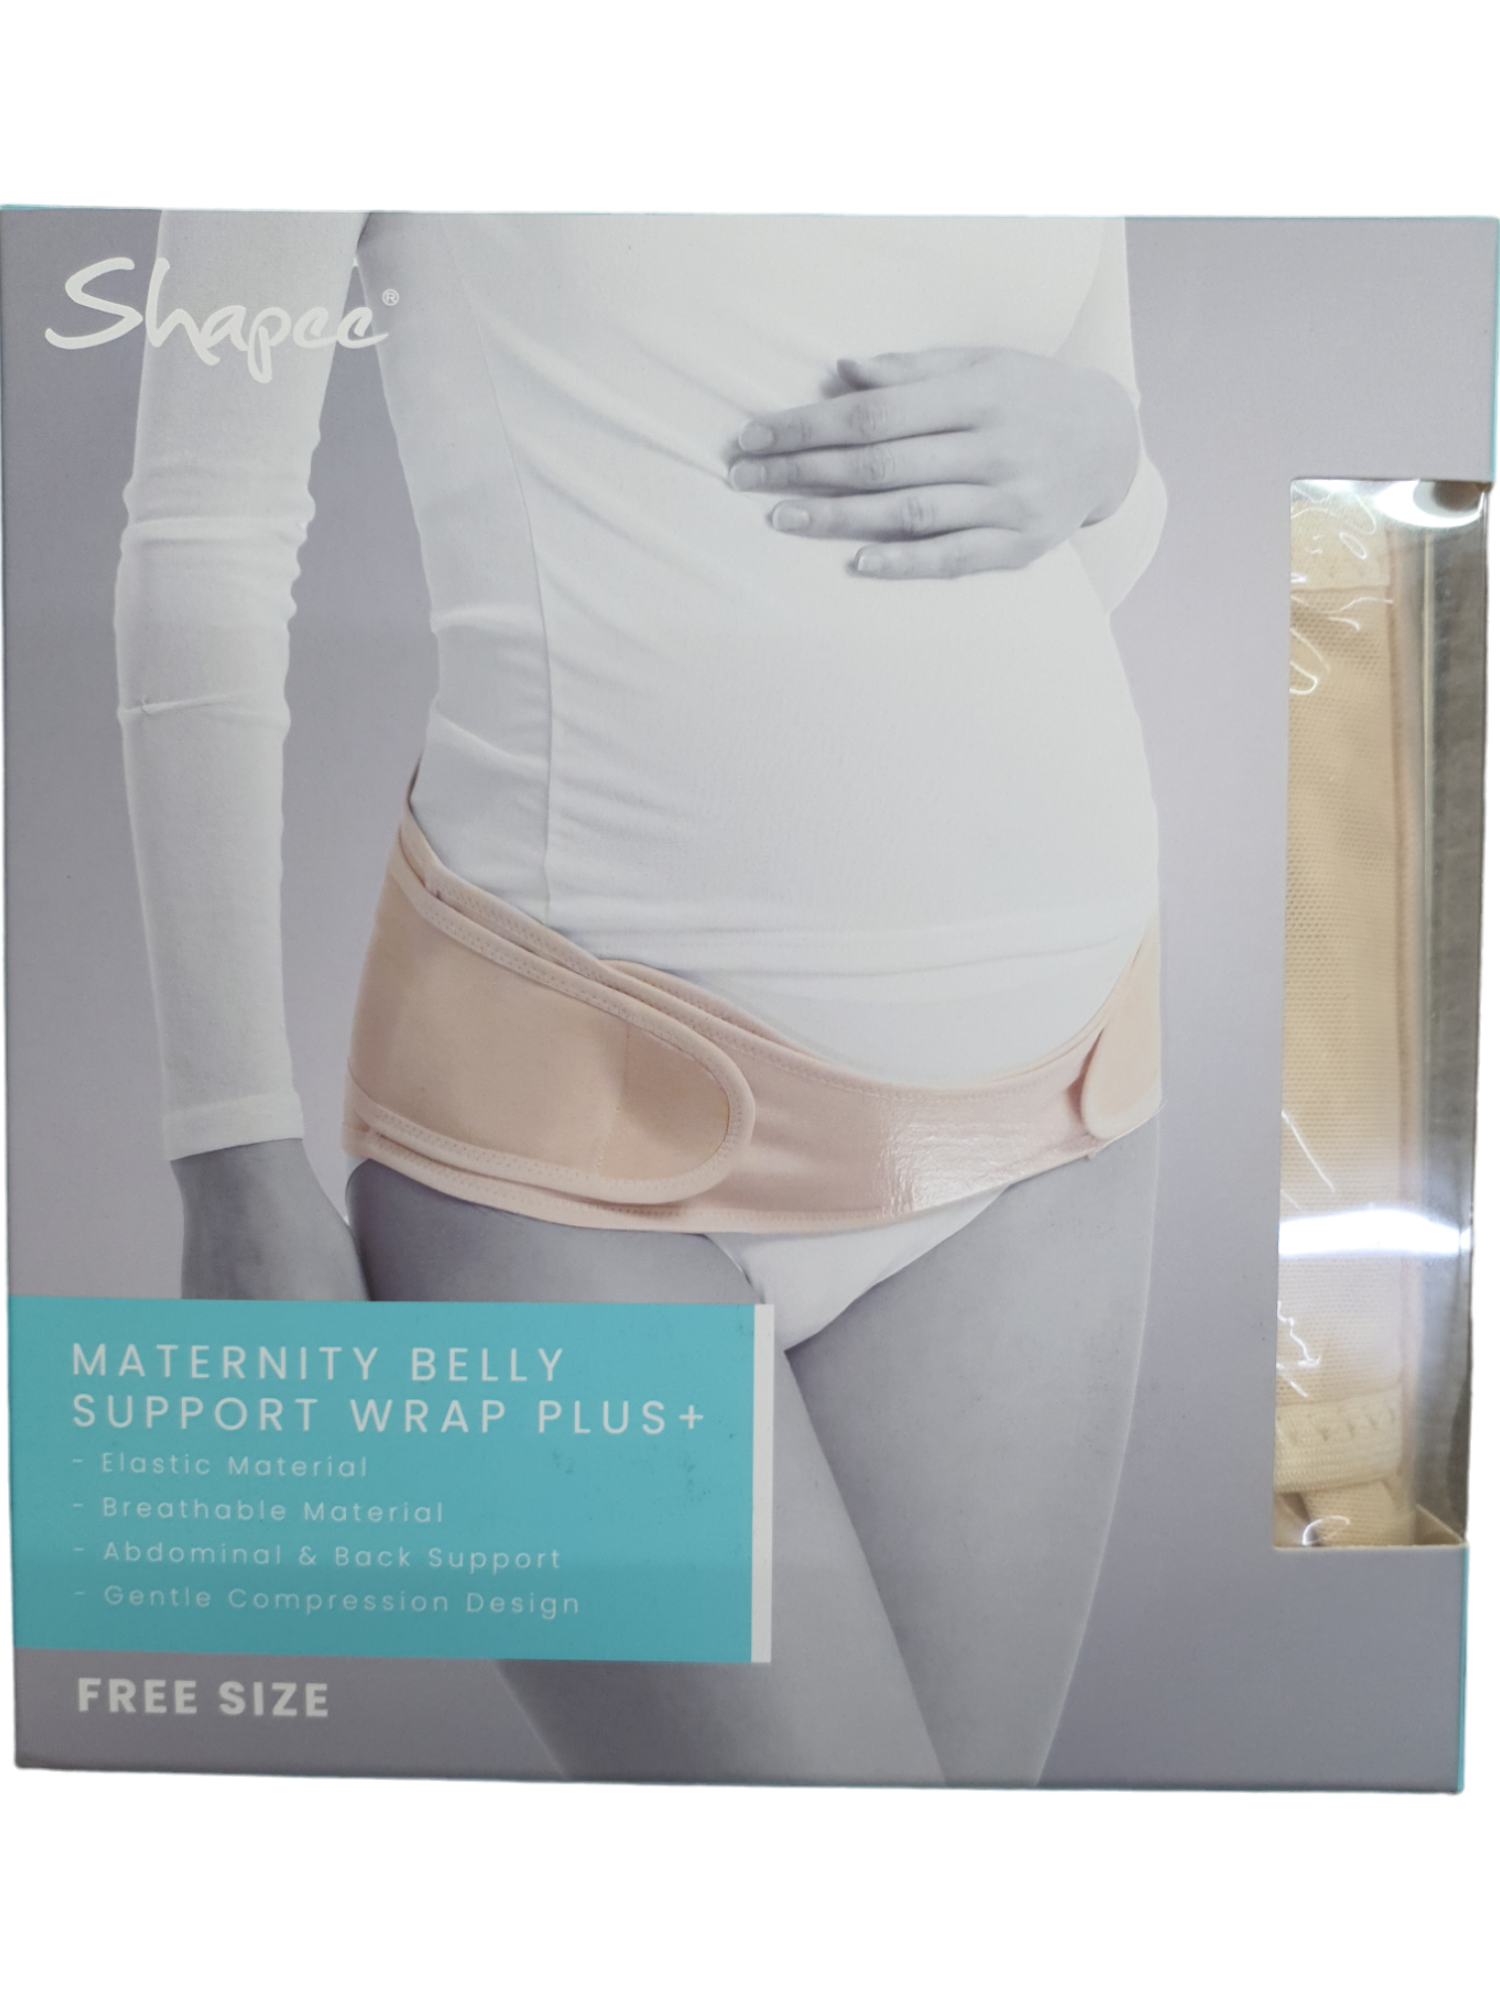 Shapee Maternity Belly Support Wrap Plus+ FREE SIZE Beige